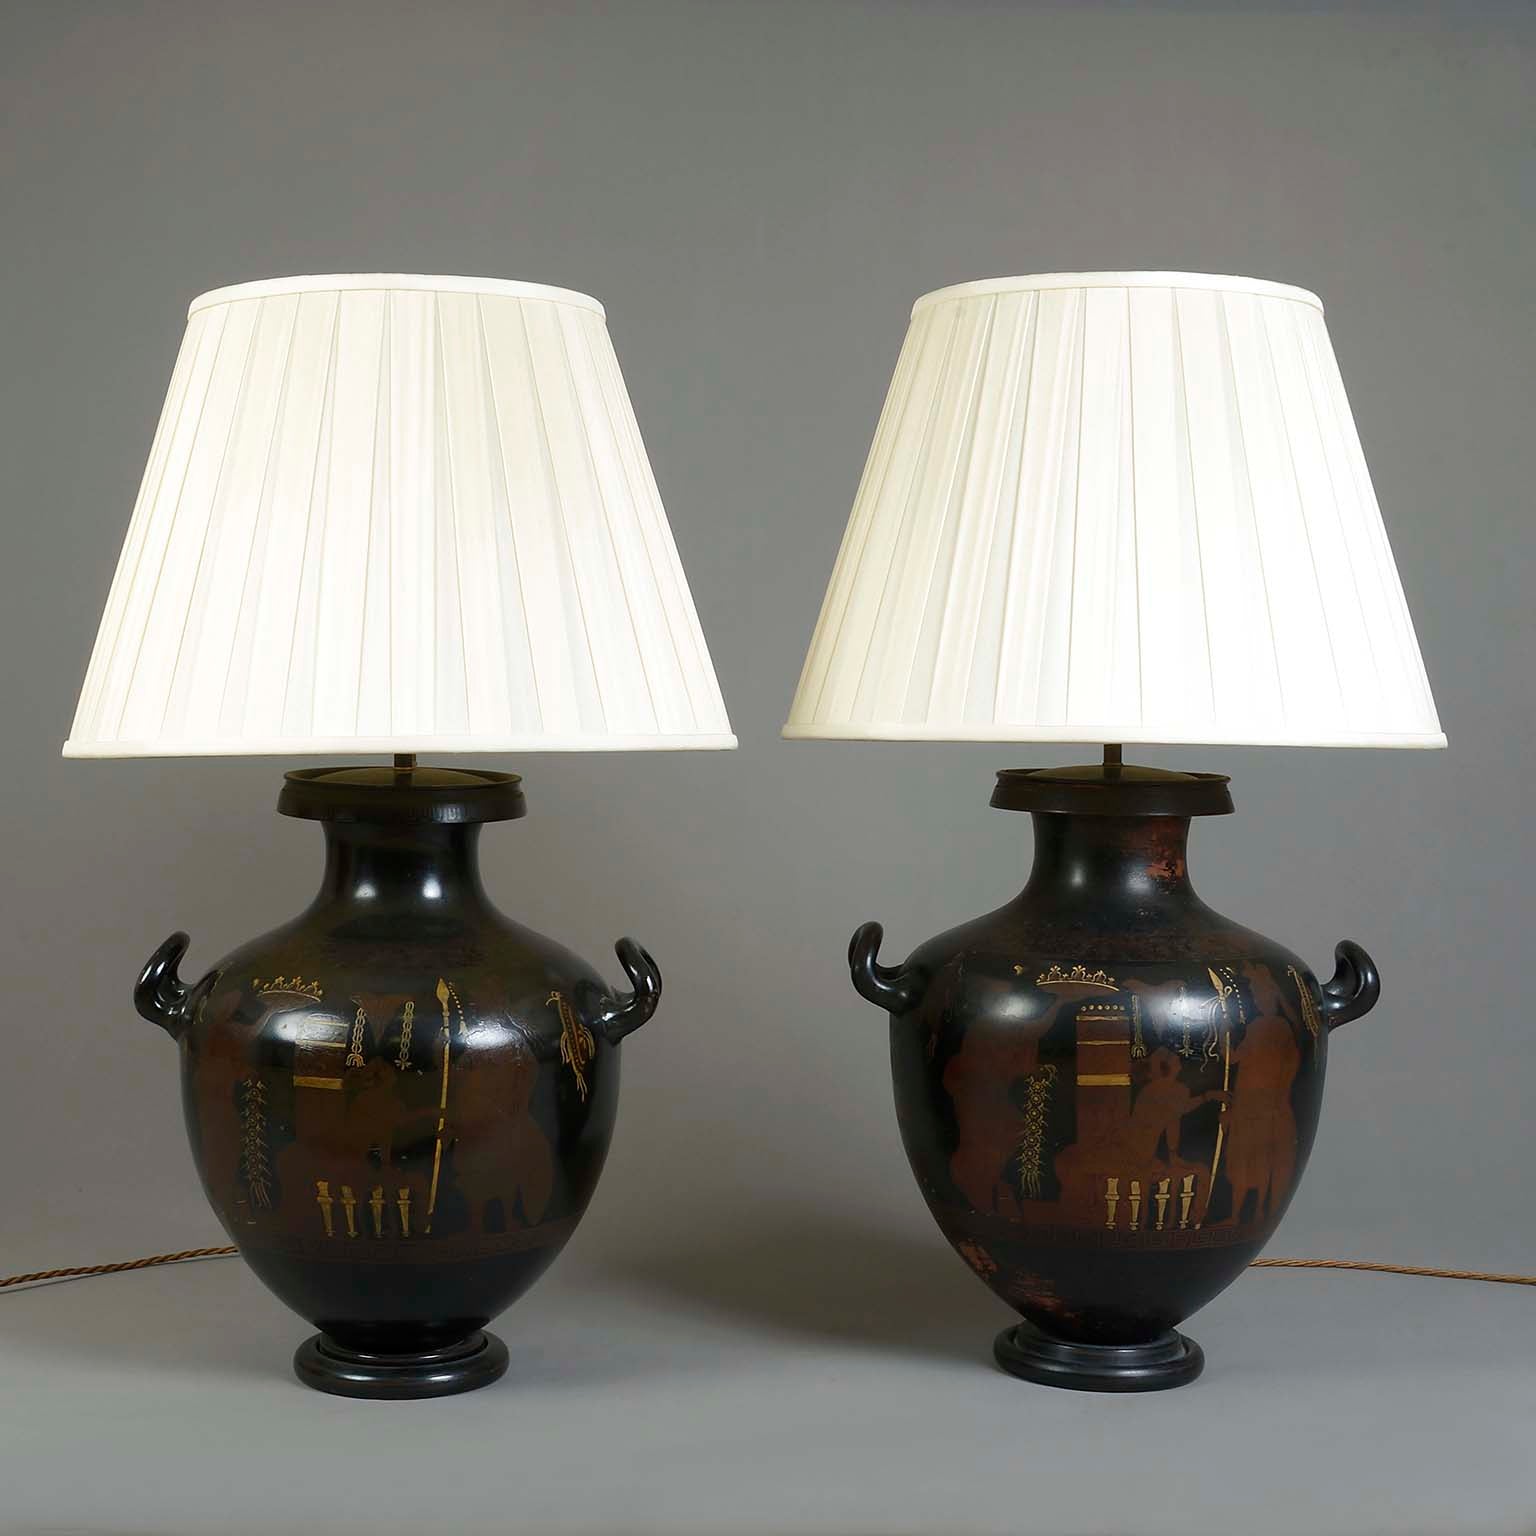 Matched Pair of Greek Revival Table Lamps